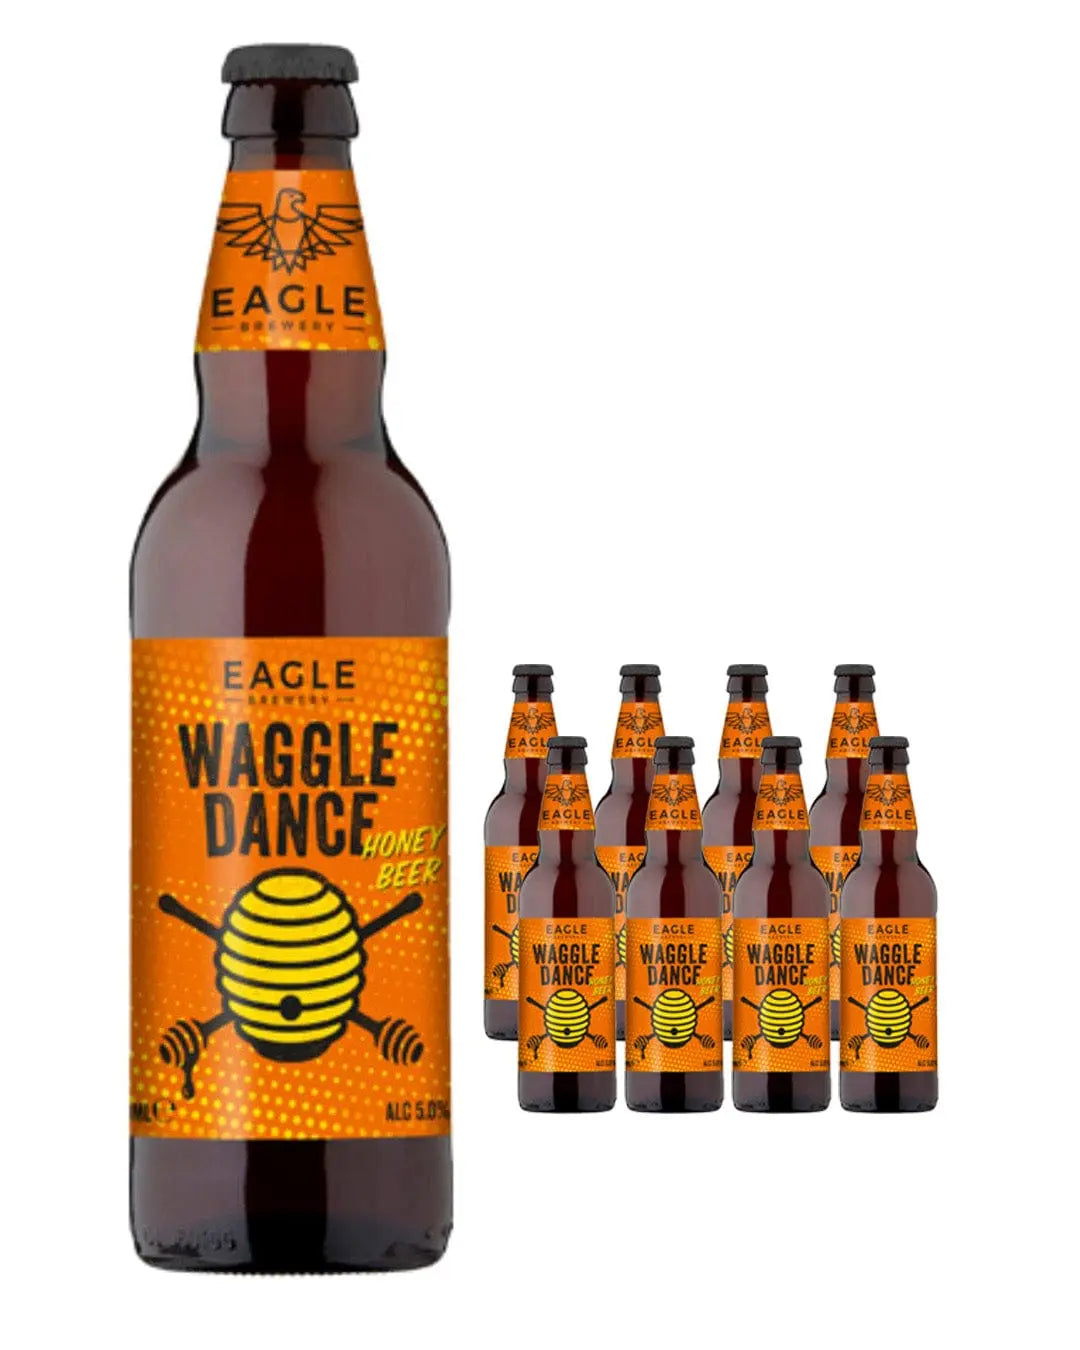 Eagle Waggle Dance Beer Multipack, 8 x 500 ml Beer